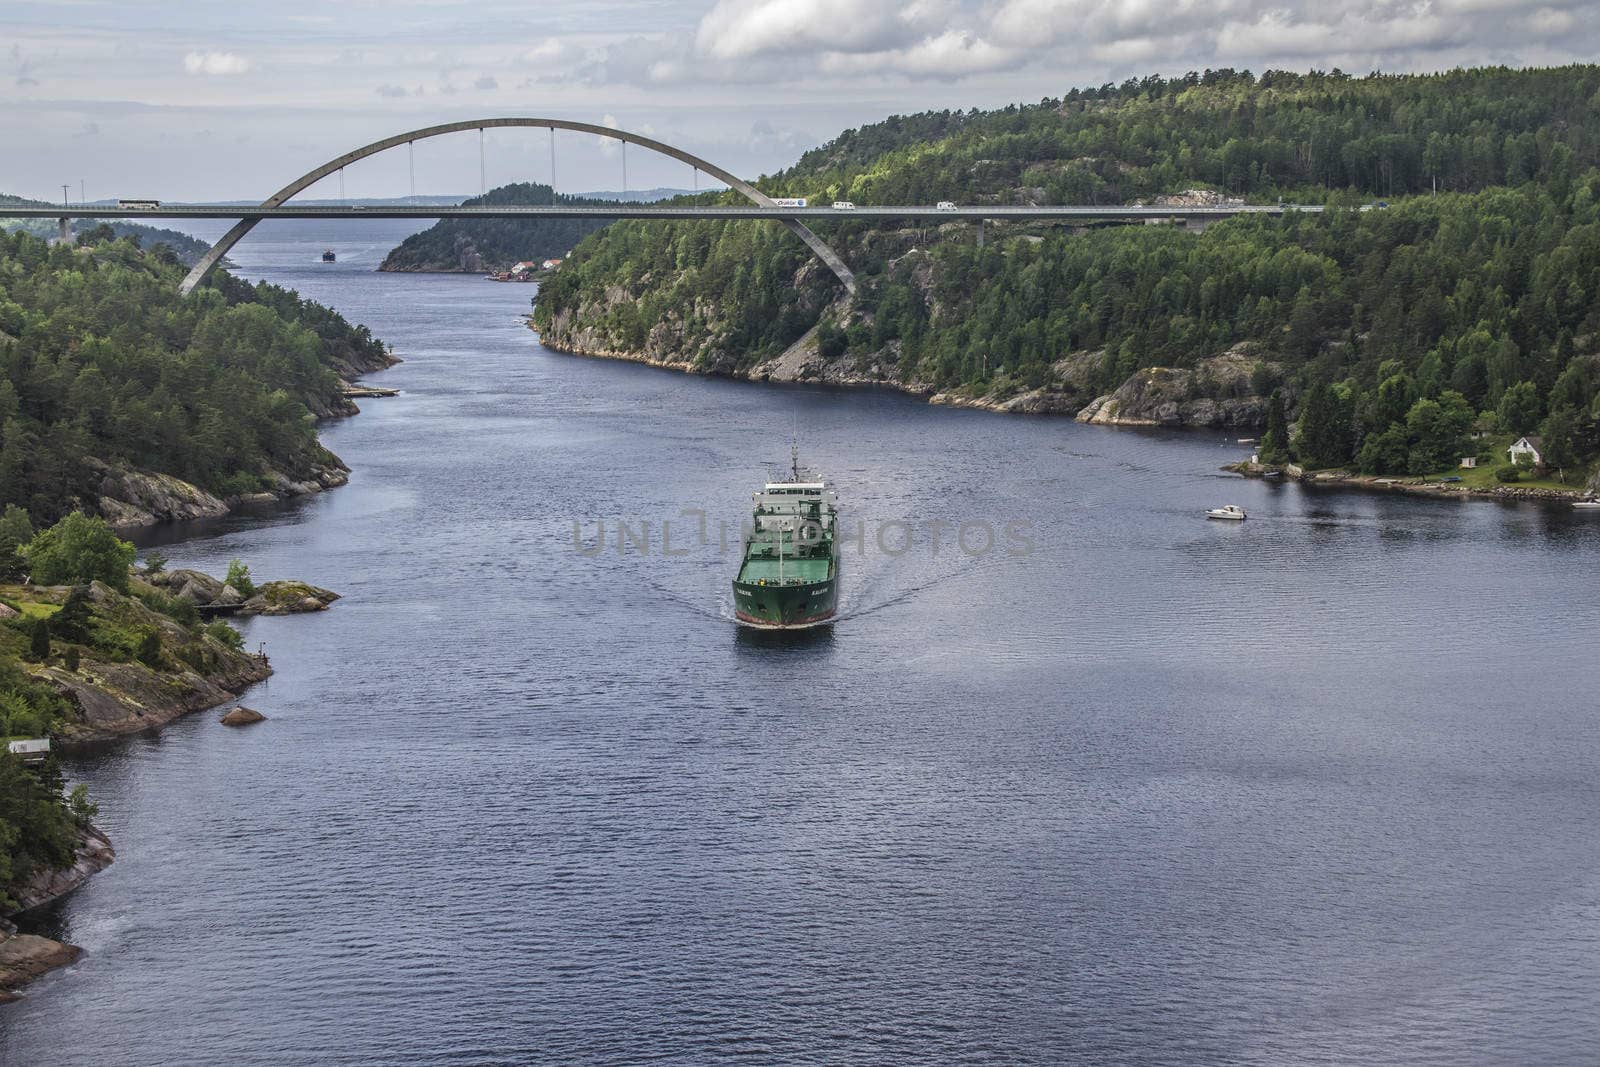 Cargo ship Kalkvik  going to the port of Halden, Norway in order to unload clay. The picture is shot from Svinesund Bridge.